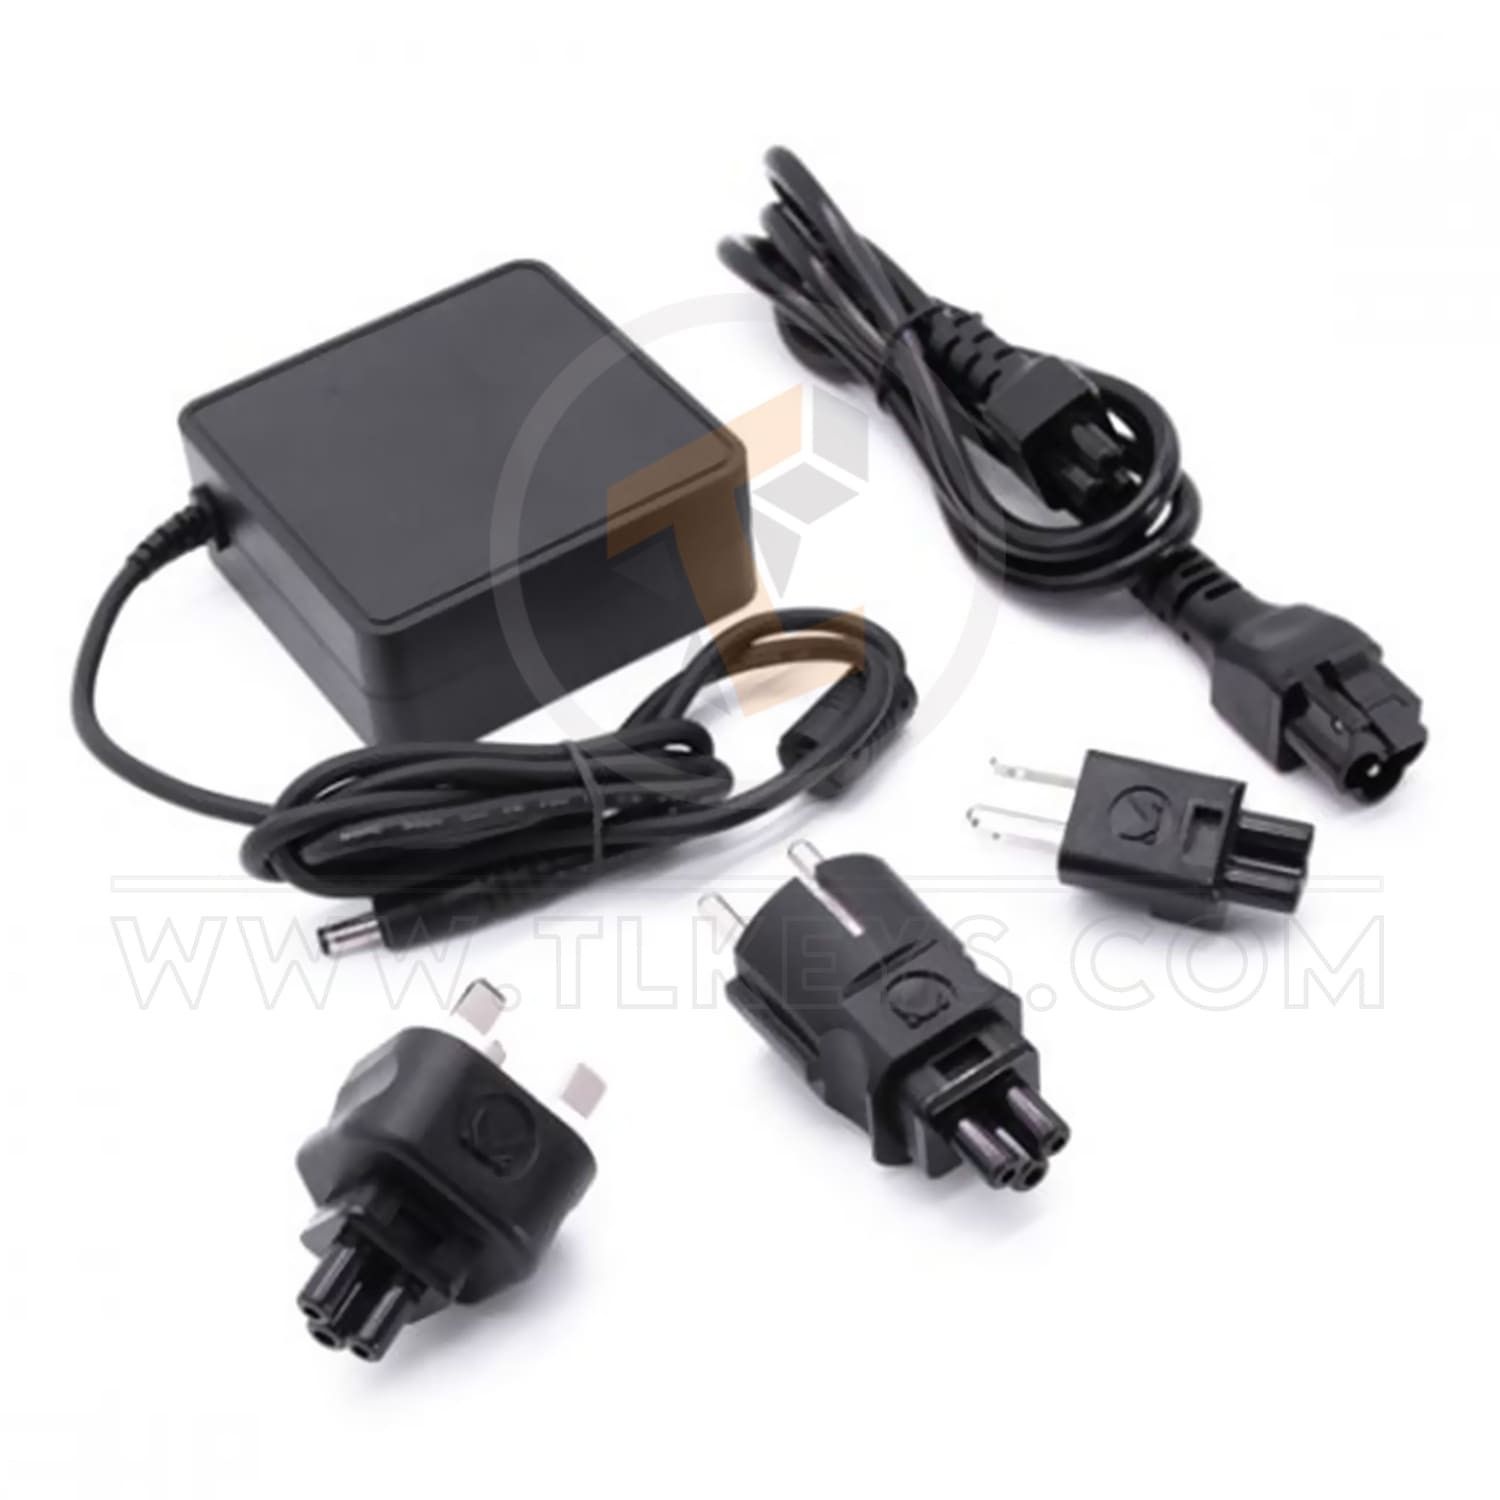 Switch Mode Power Supply for FLEX with plugs Adapter